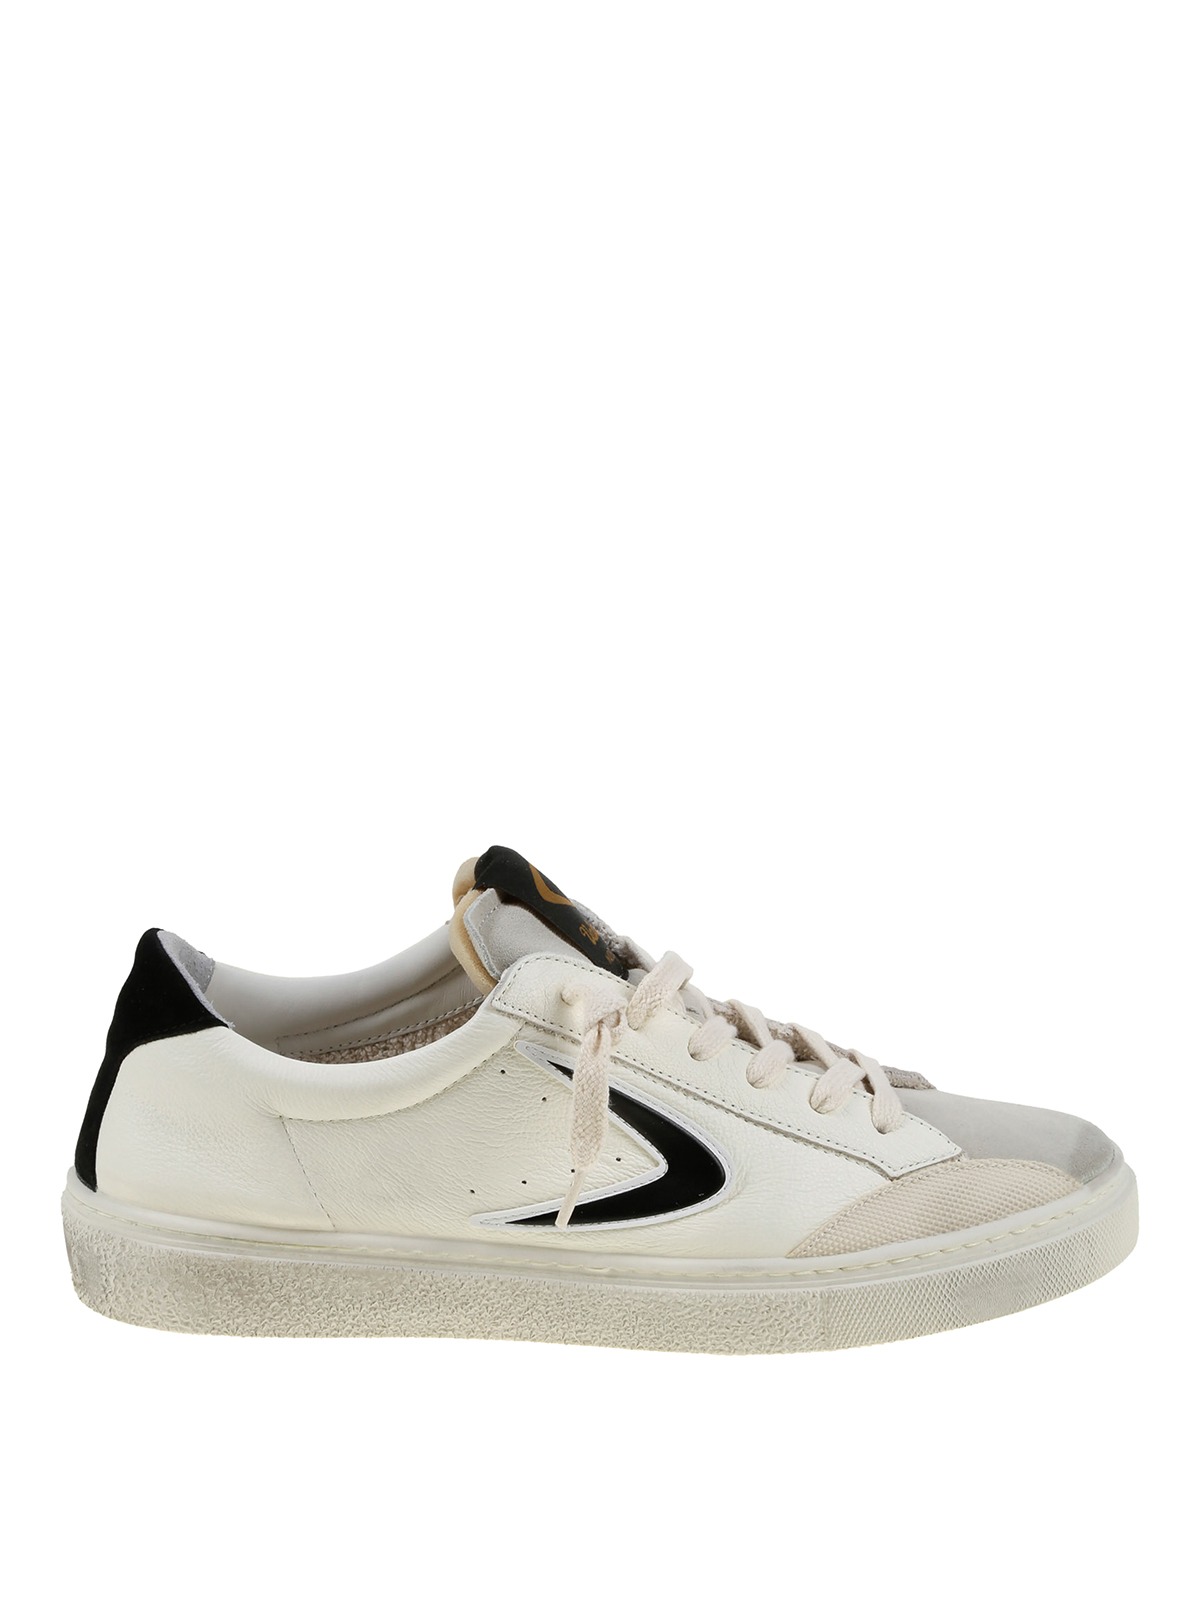 Ollie leather low trainers